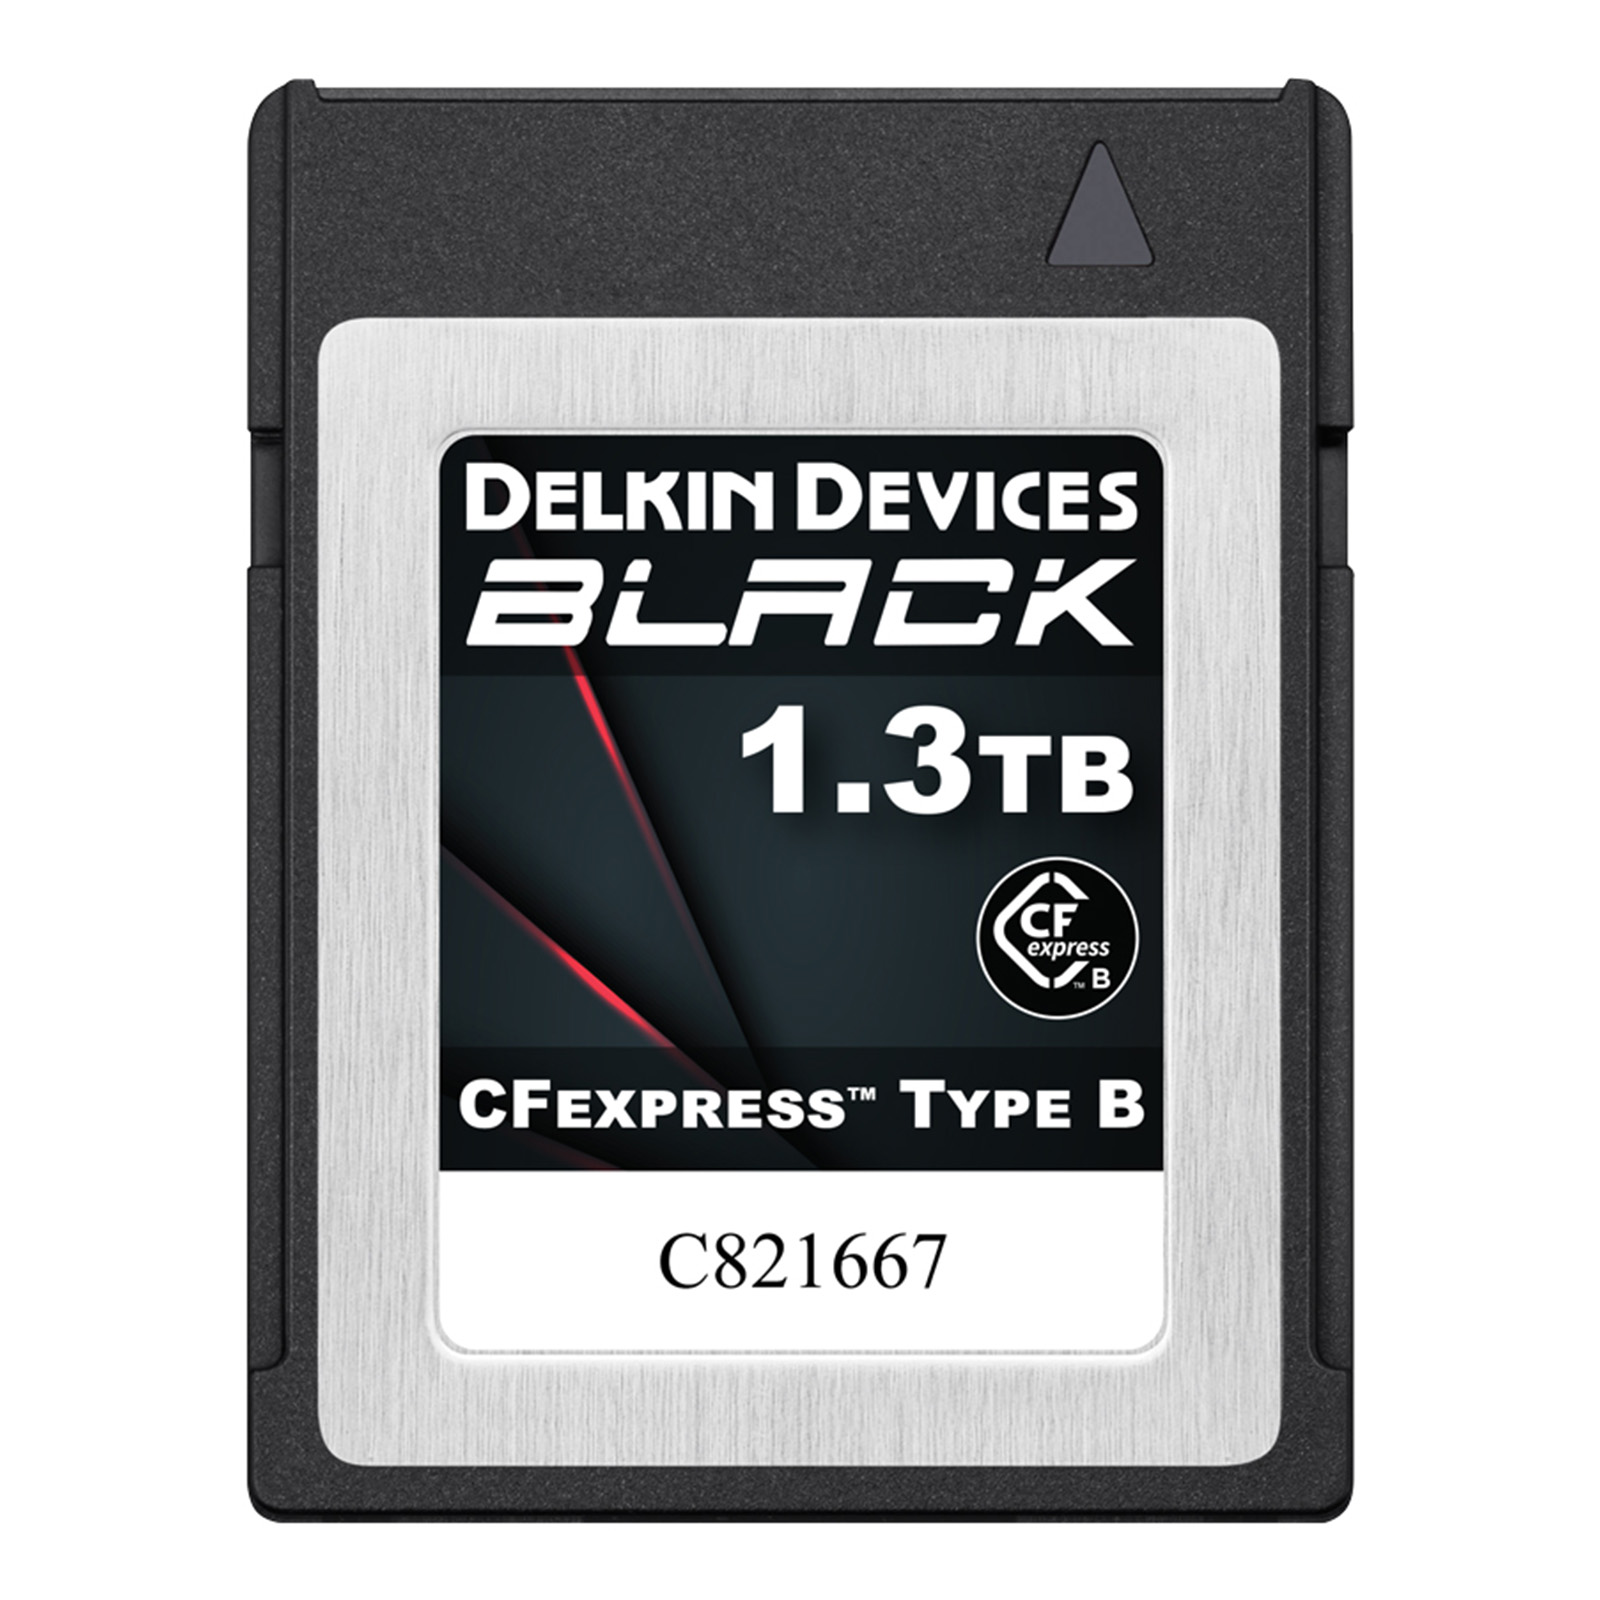 Image of Delkin BLACK 1.3TB 1800MB/s G4 CFexpress Type B Memory Card